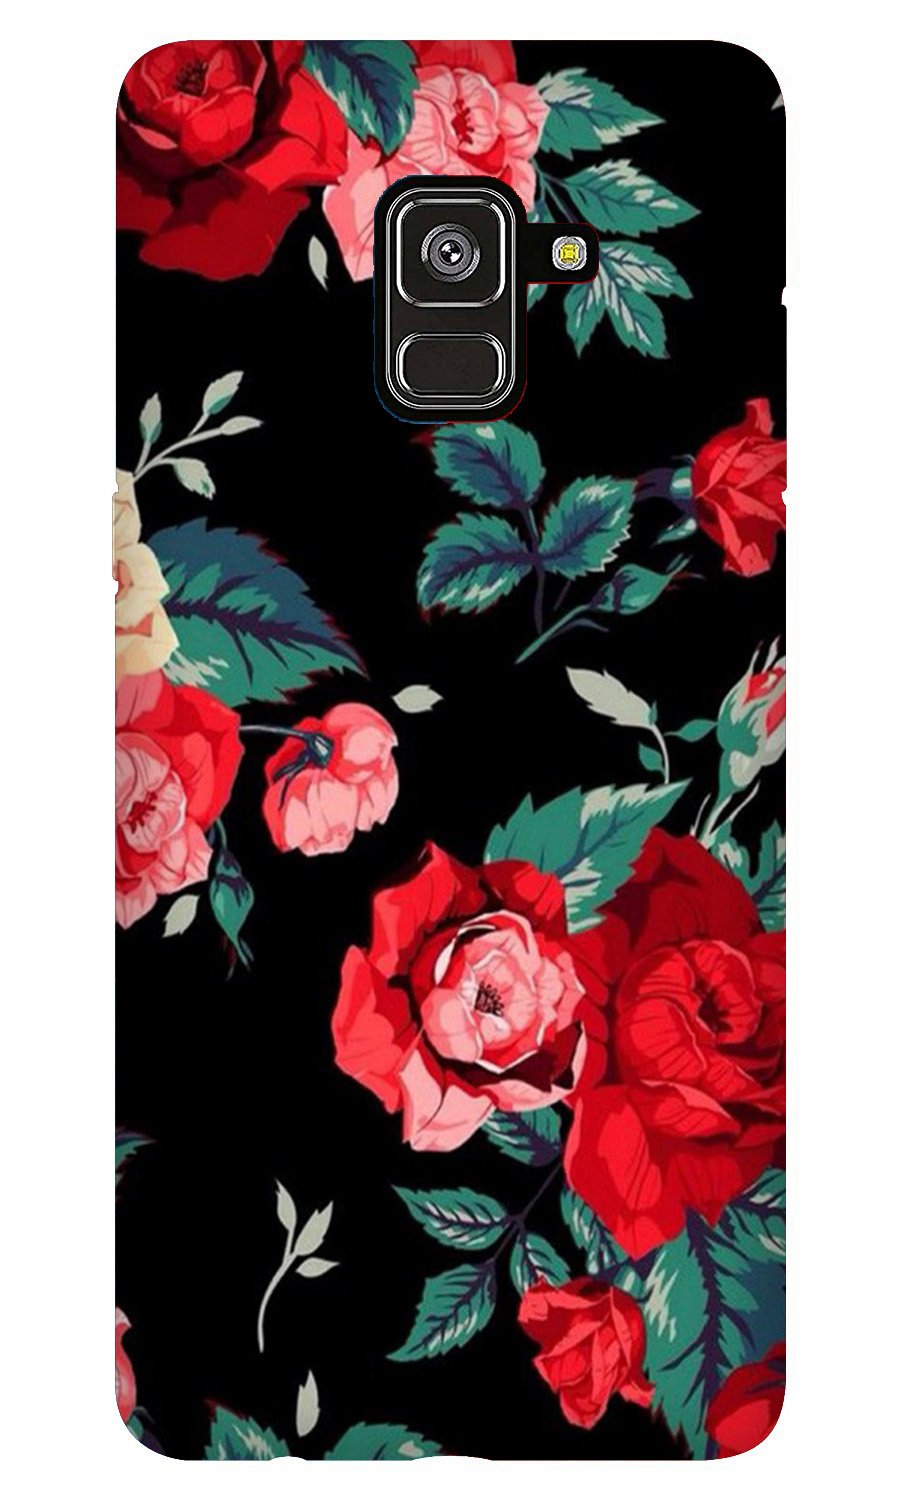 Red Rose2 Case for Galaxy A8 Plus